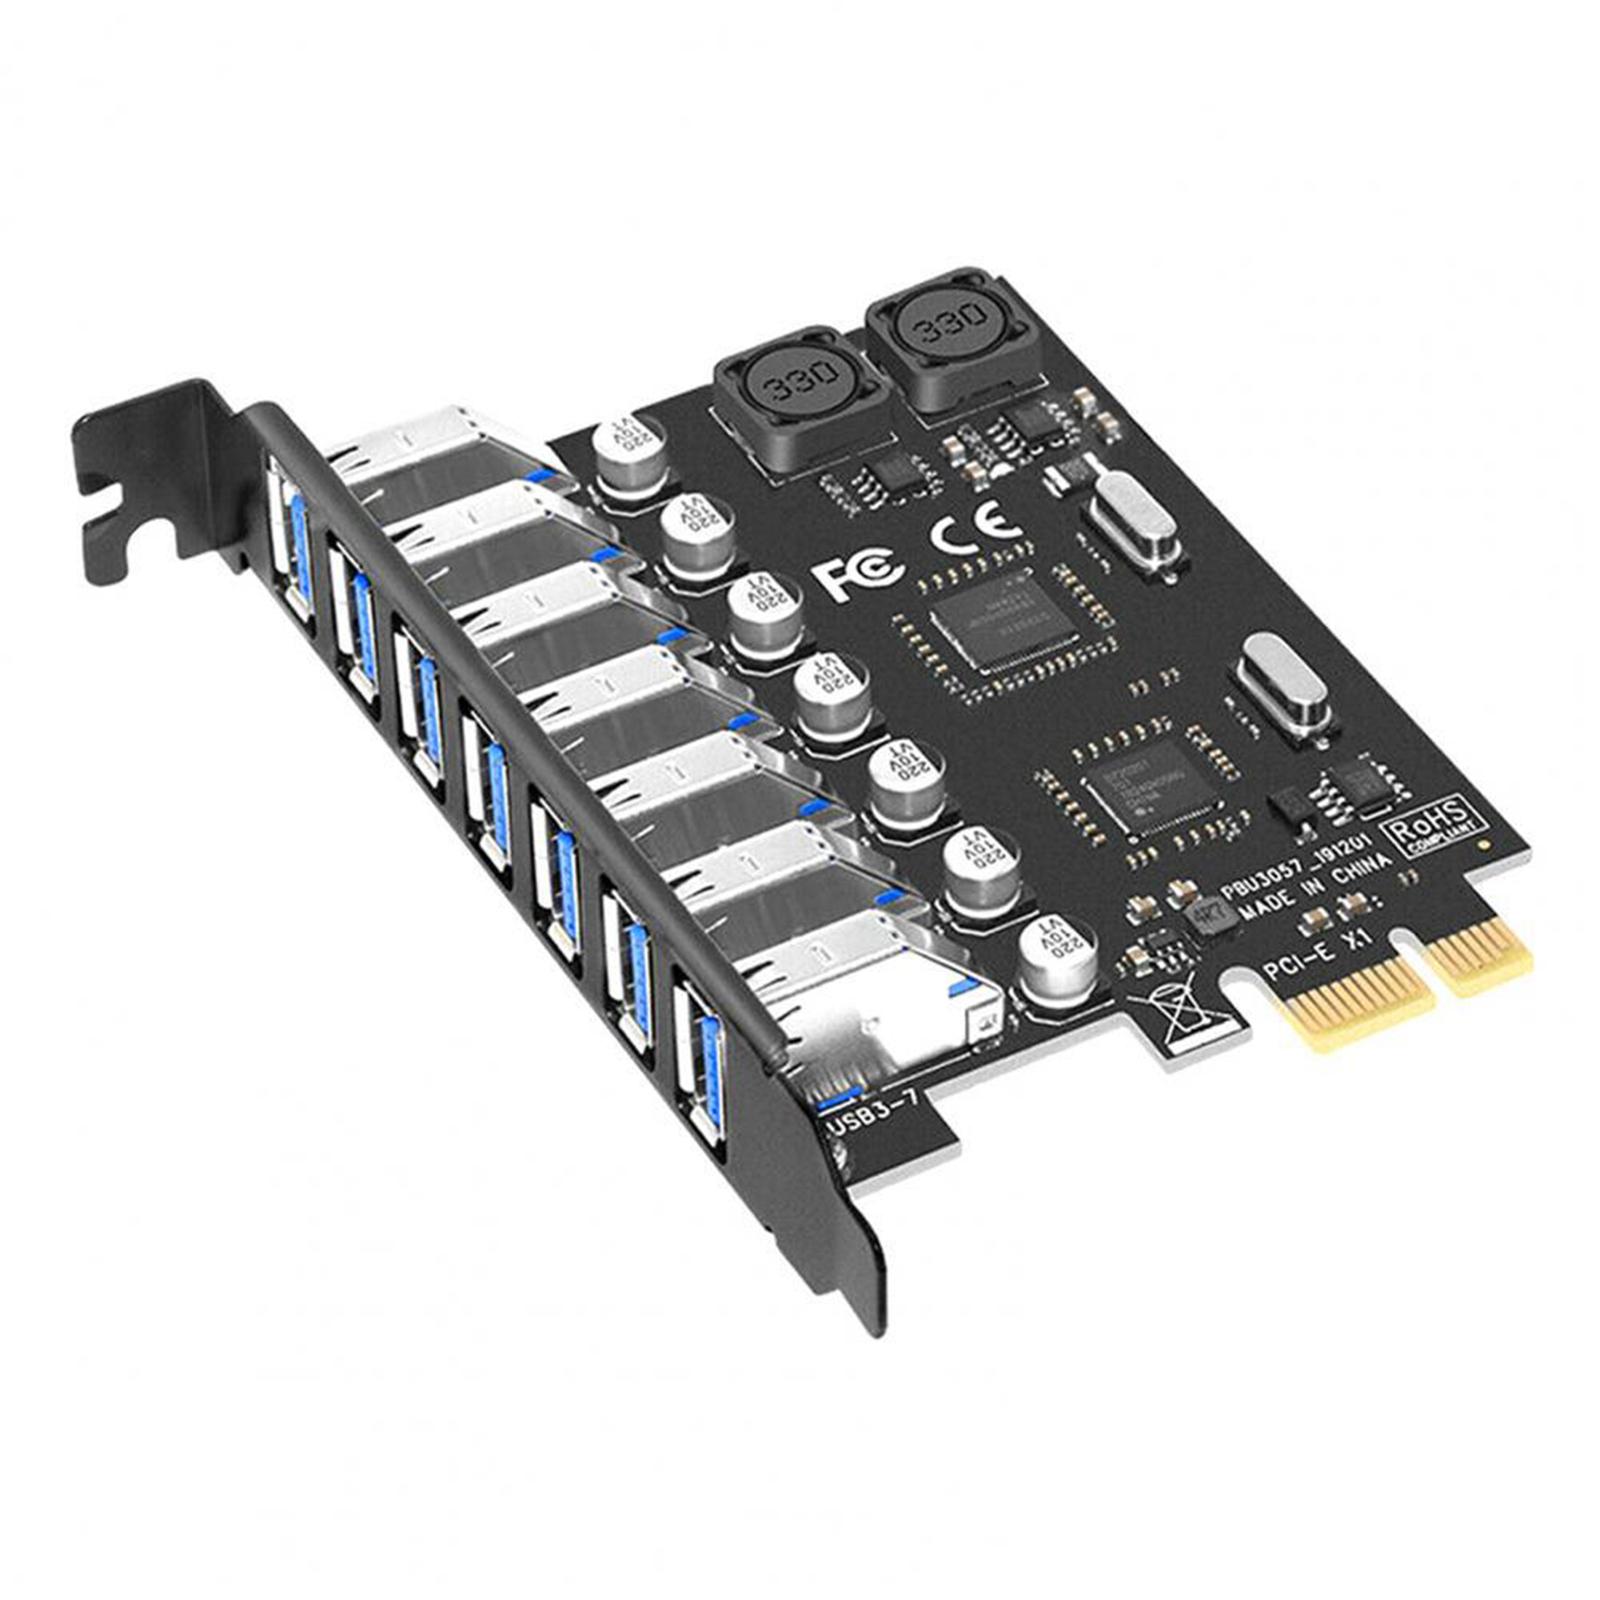 PCIE to USB 3.0 Expansion Adapter Card 5Gbps Controller Standard Converter